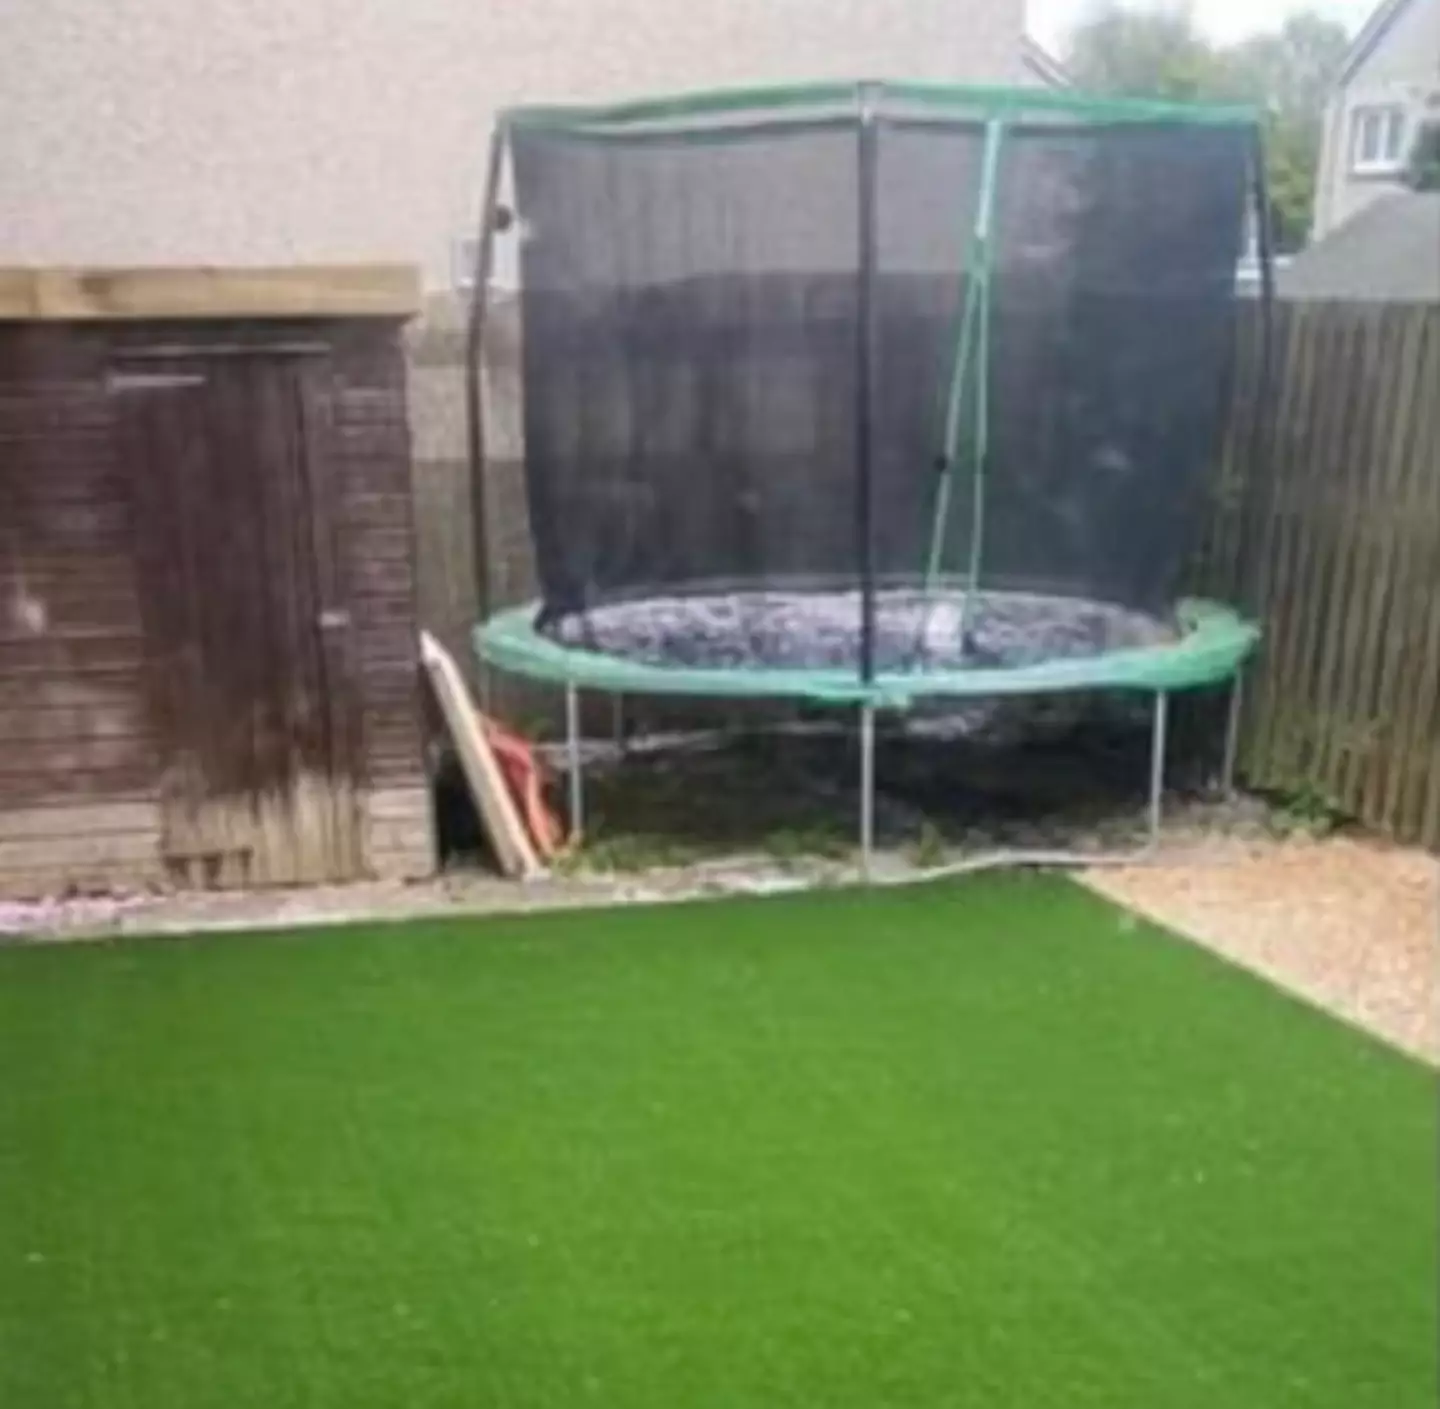 A homeowner has taken to Twitter to rant about how she has to hoover her astroturf every day.